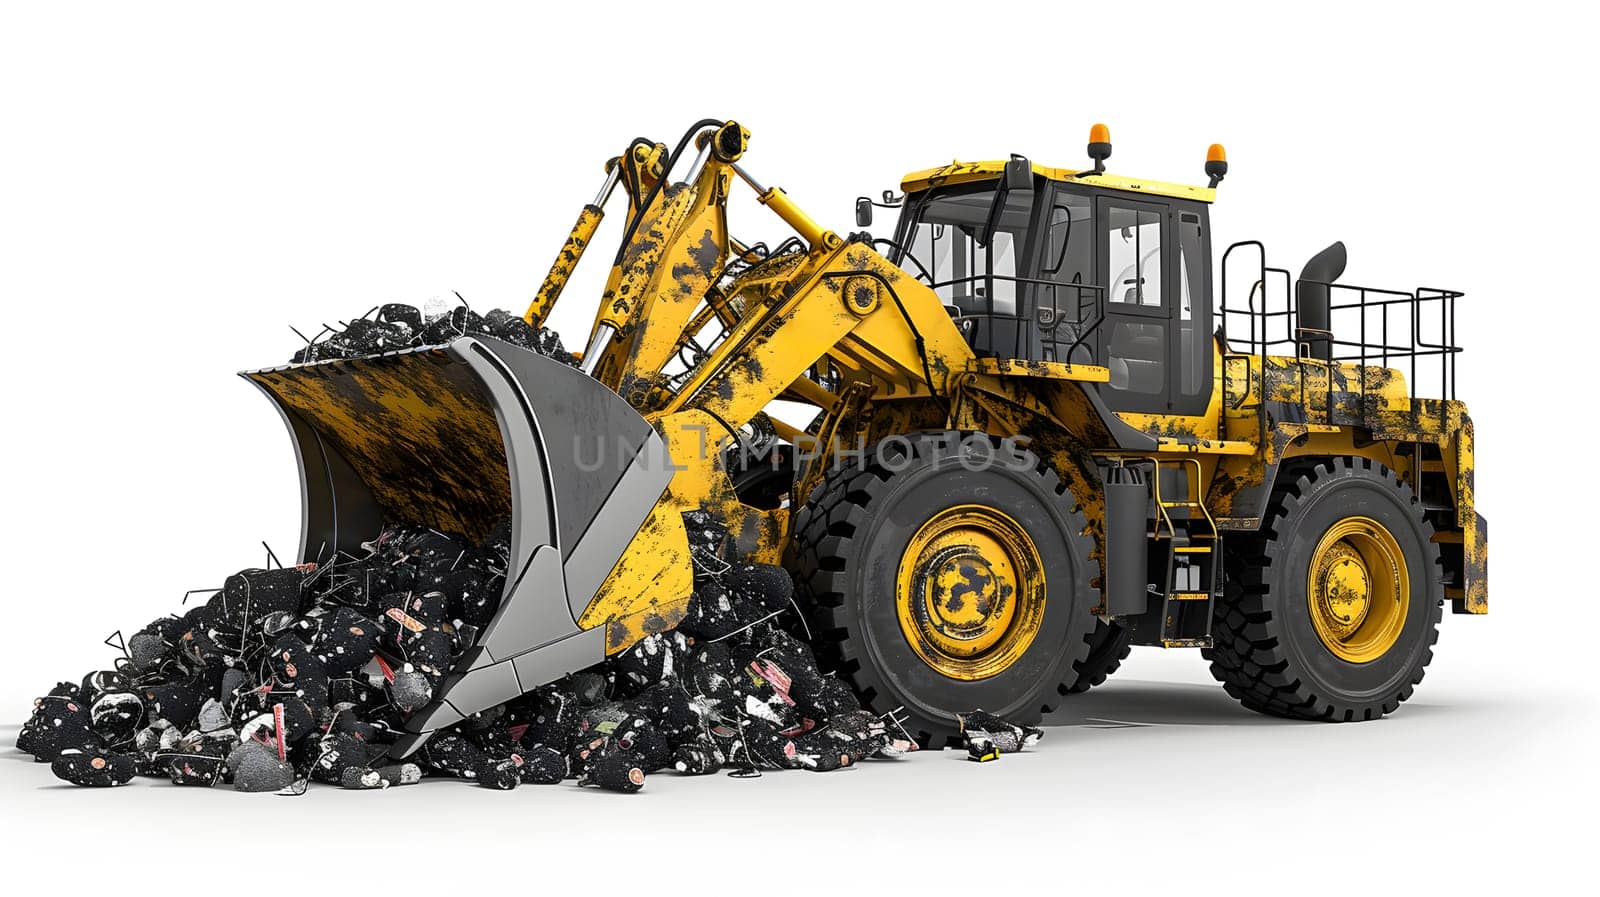 A yellow bulldozer with automotive tires is scooping up a pile of garbage using its wheel system. The machines tread grips the asphalt surface with synthetic rubber for efficient cleaning